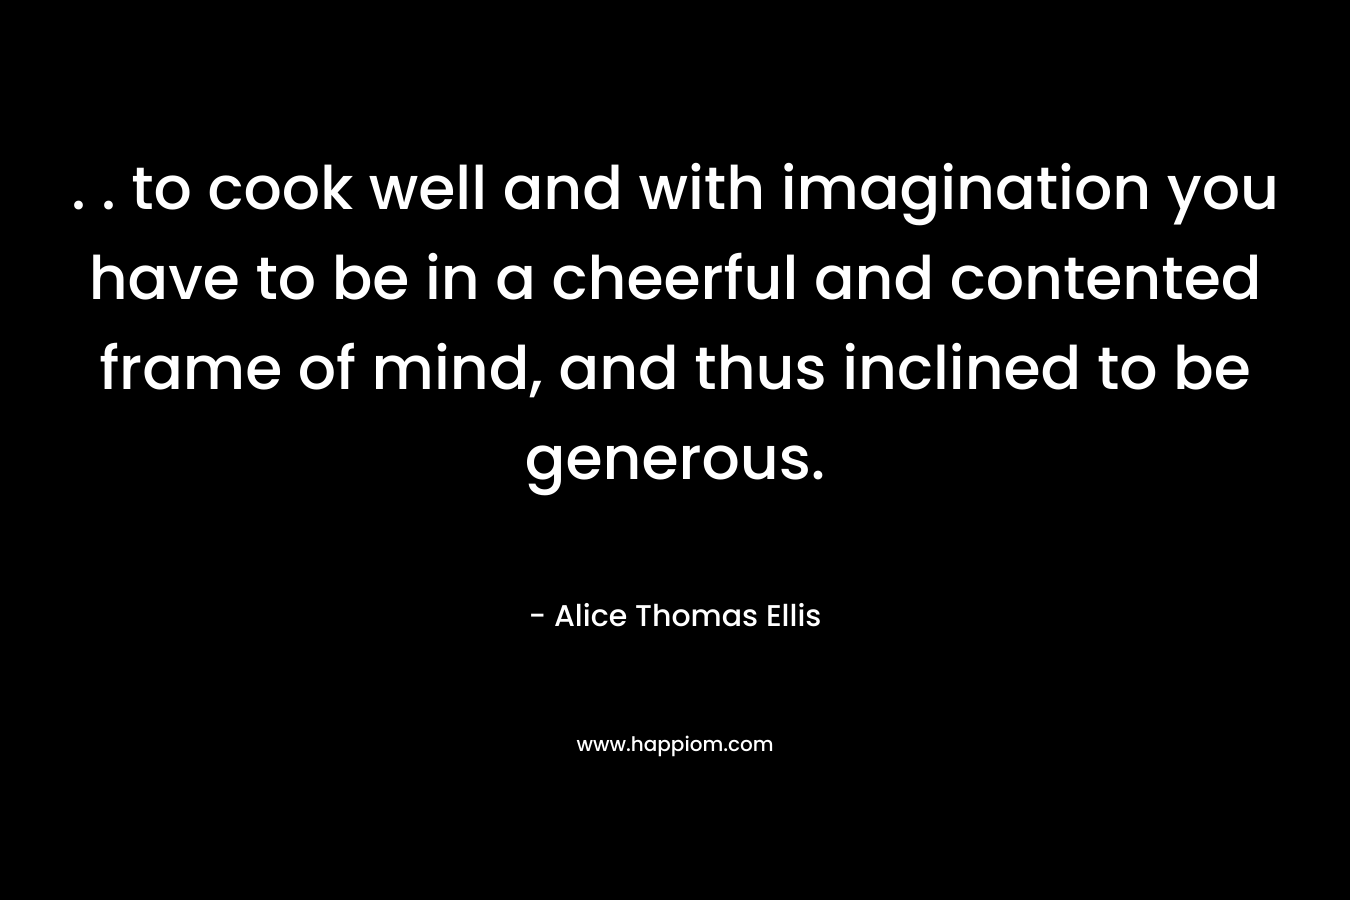 . . to cook well and with imagination you have to be in a cheerful and contented frame of mind, and thus inclined to be generous. – Alice Thomas Ellis